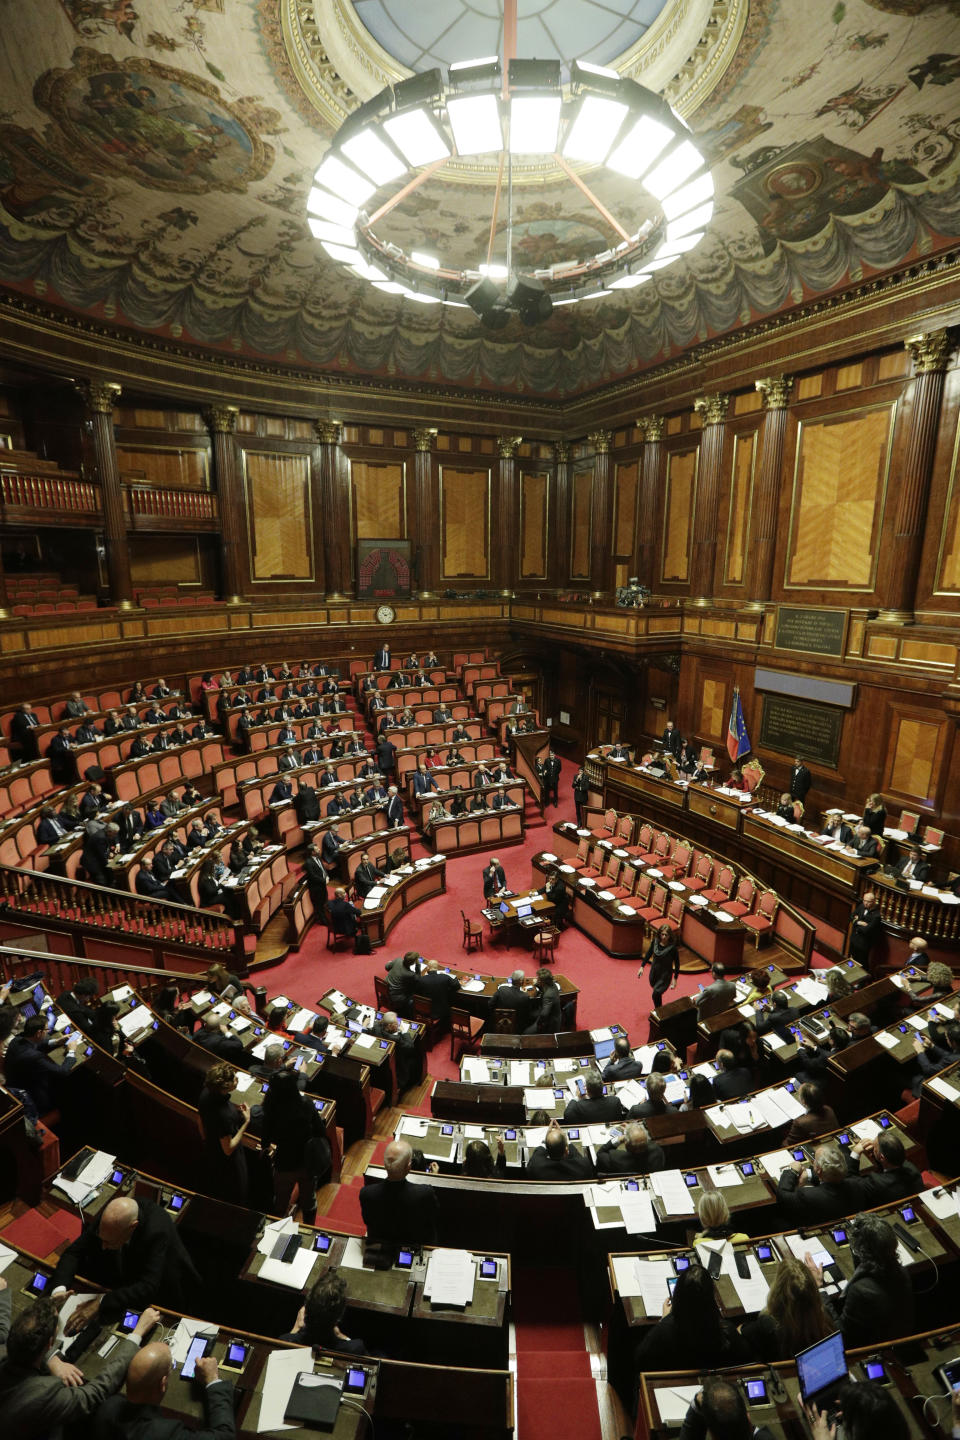 A view of the Italian Senate during the debate on whether to allow opposition populist leader Matteo Salvini to be prosecuted – as he demands to be -- for alleging holding migrants hostage for days aboard a coast guard ship instead of letting them immediately disembark in Sicily while he was interior minister. (AP Photo/Andrew Medichini)